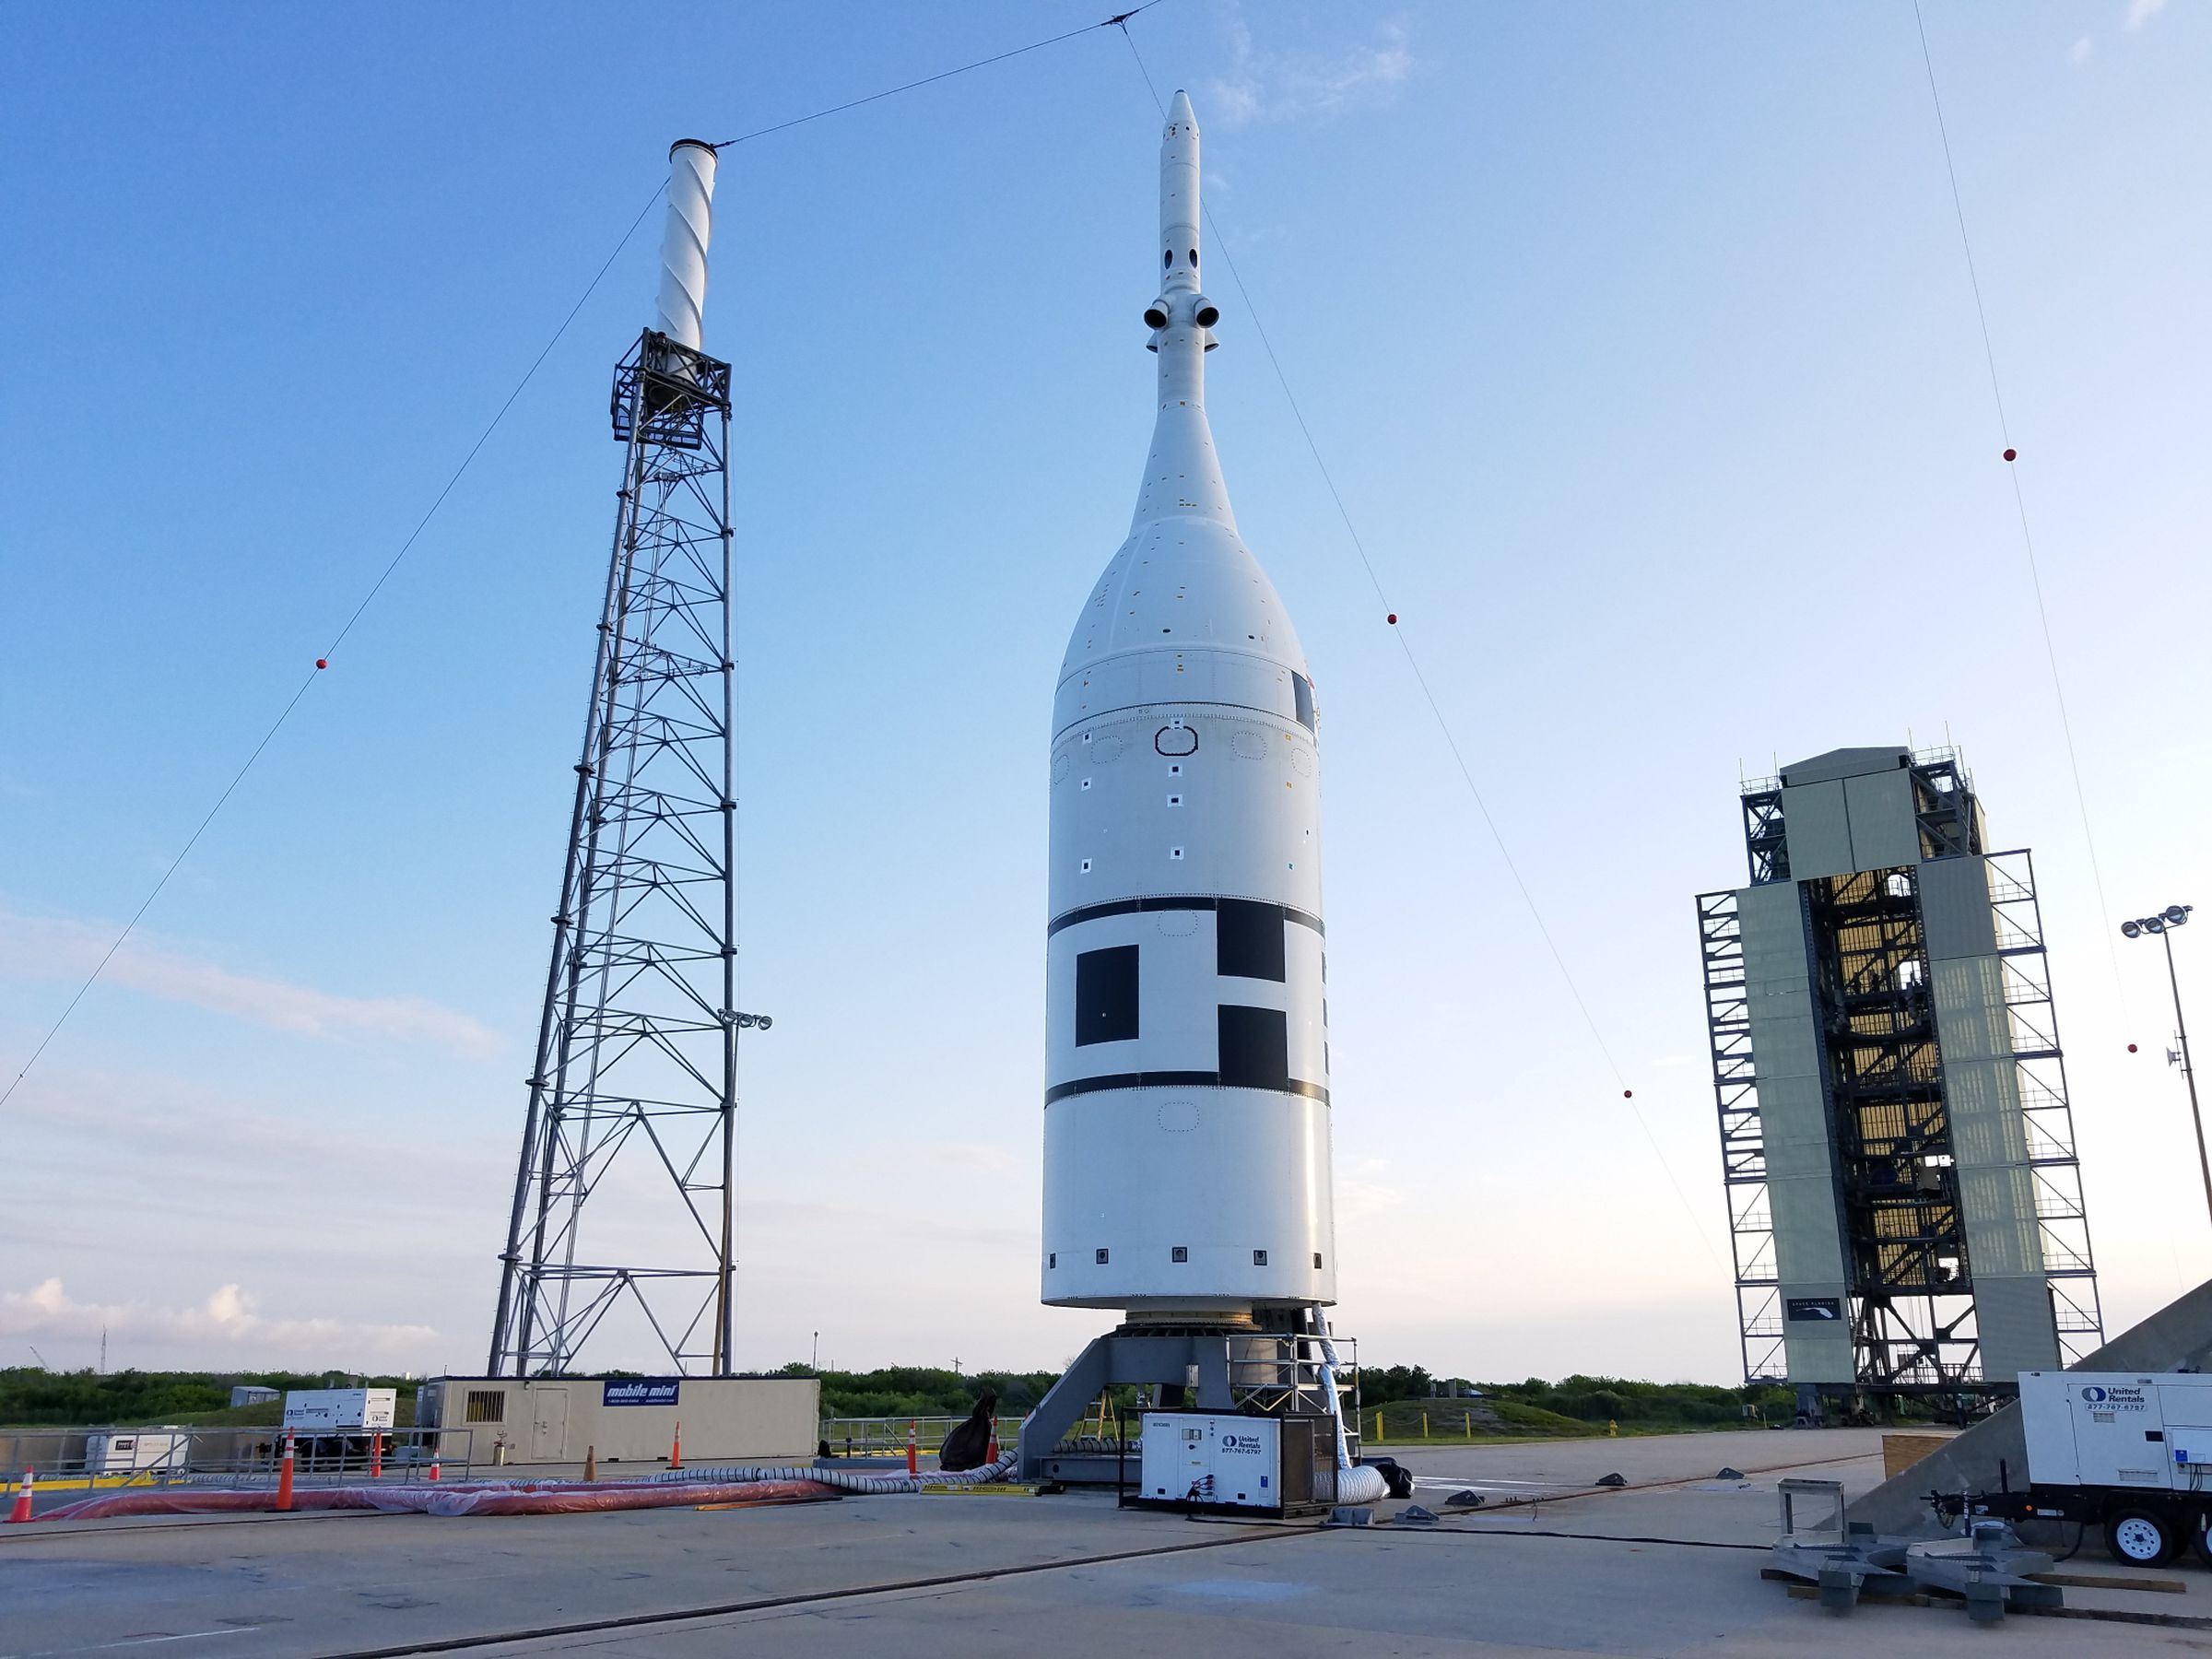 The Orion test capsule, the Launch Abort System, and the Northrop Grumman booster that will be used for the test.